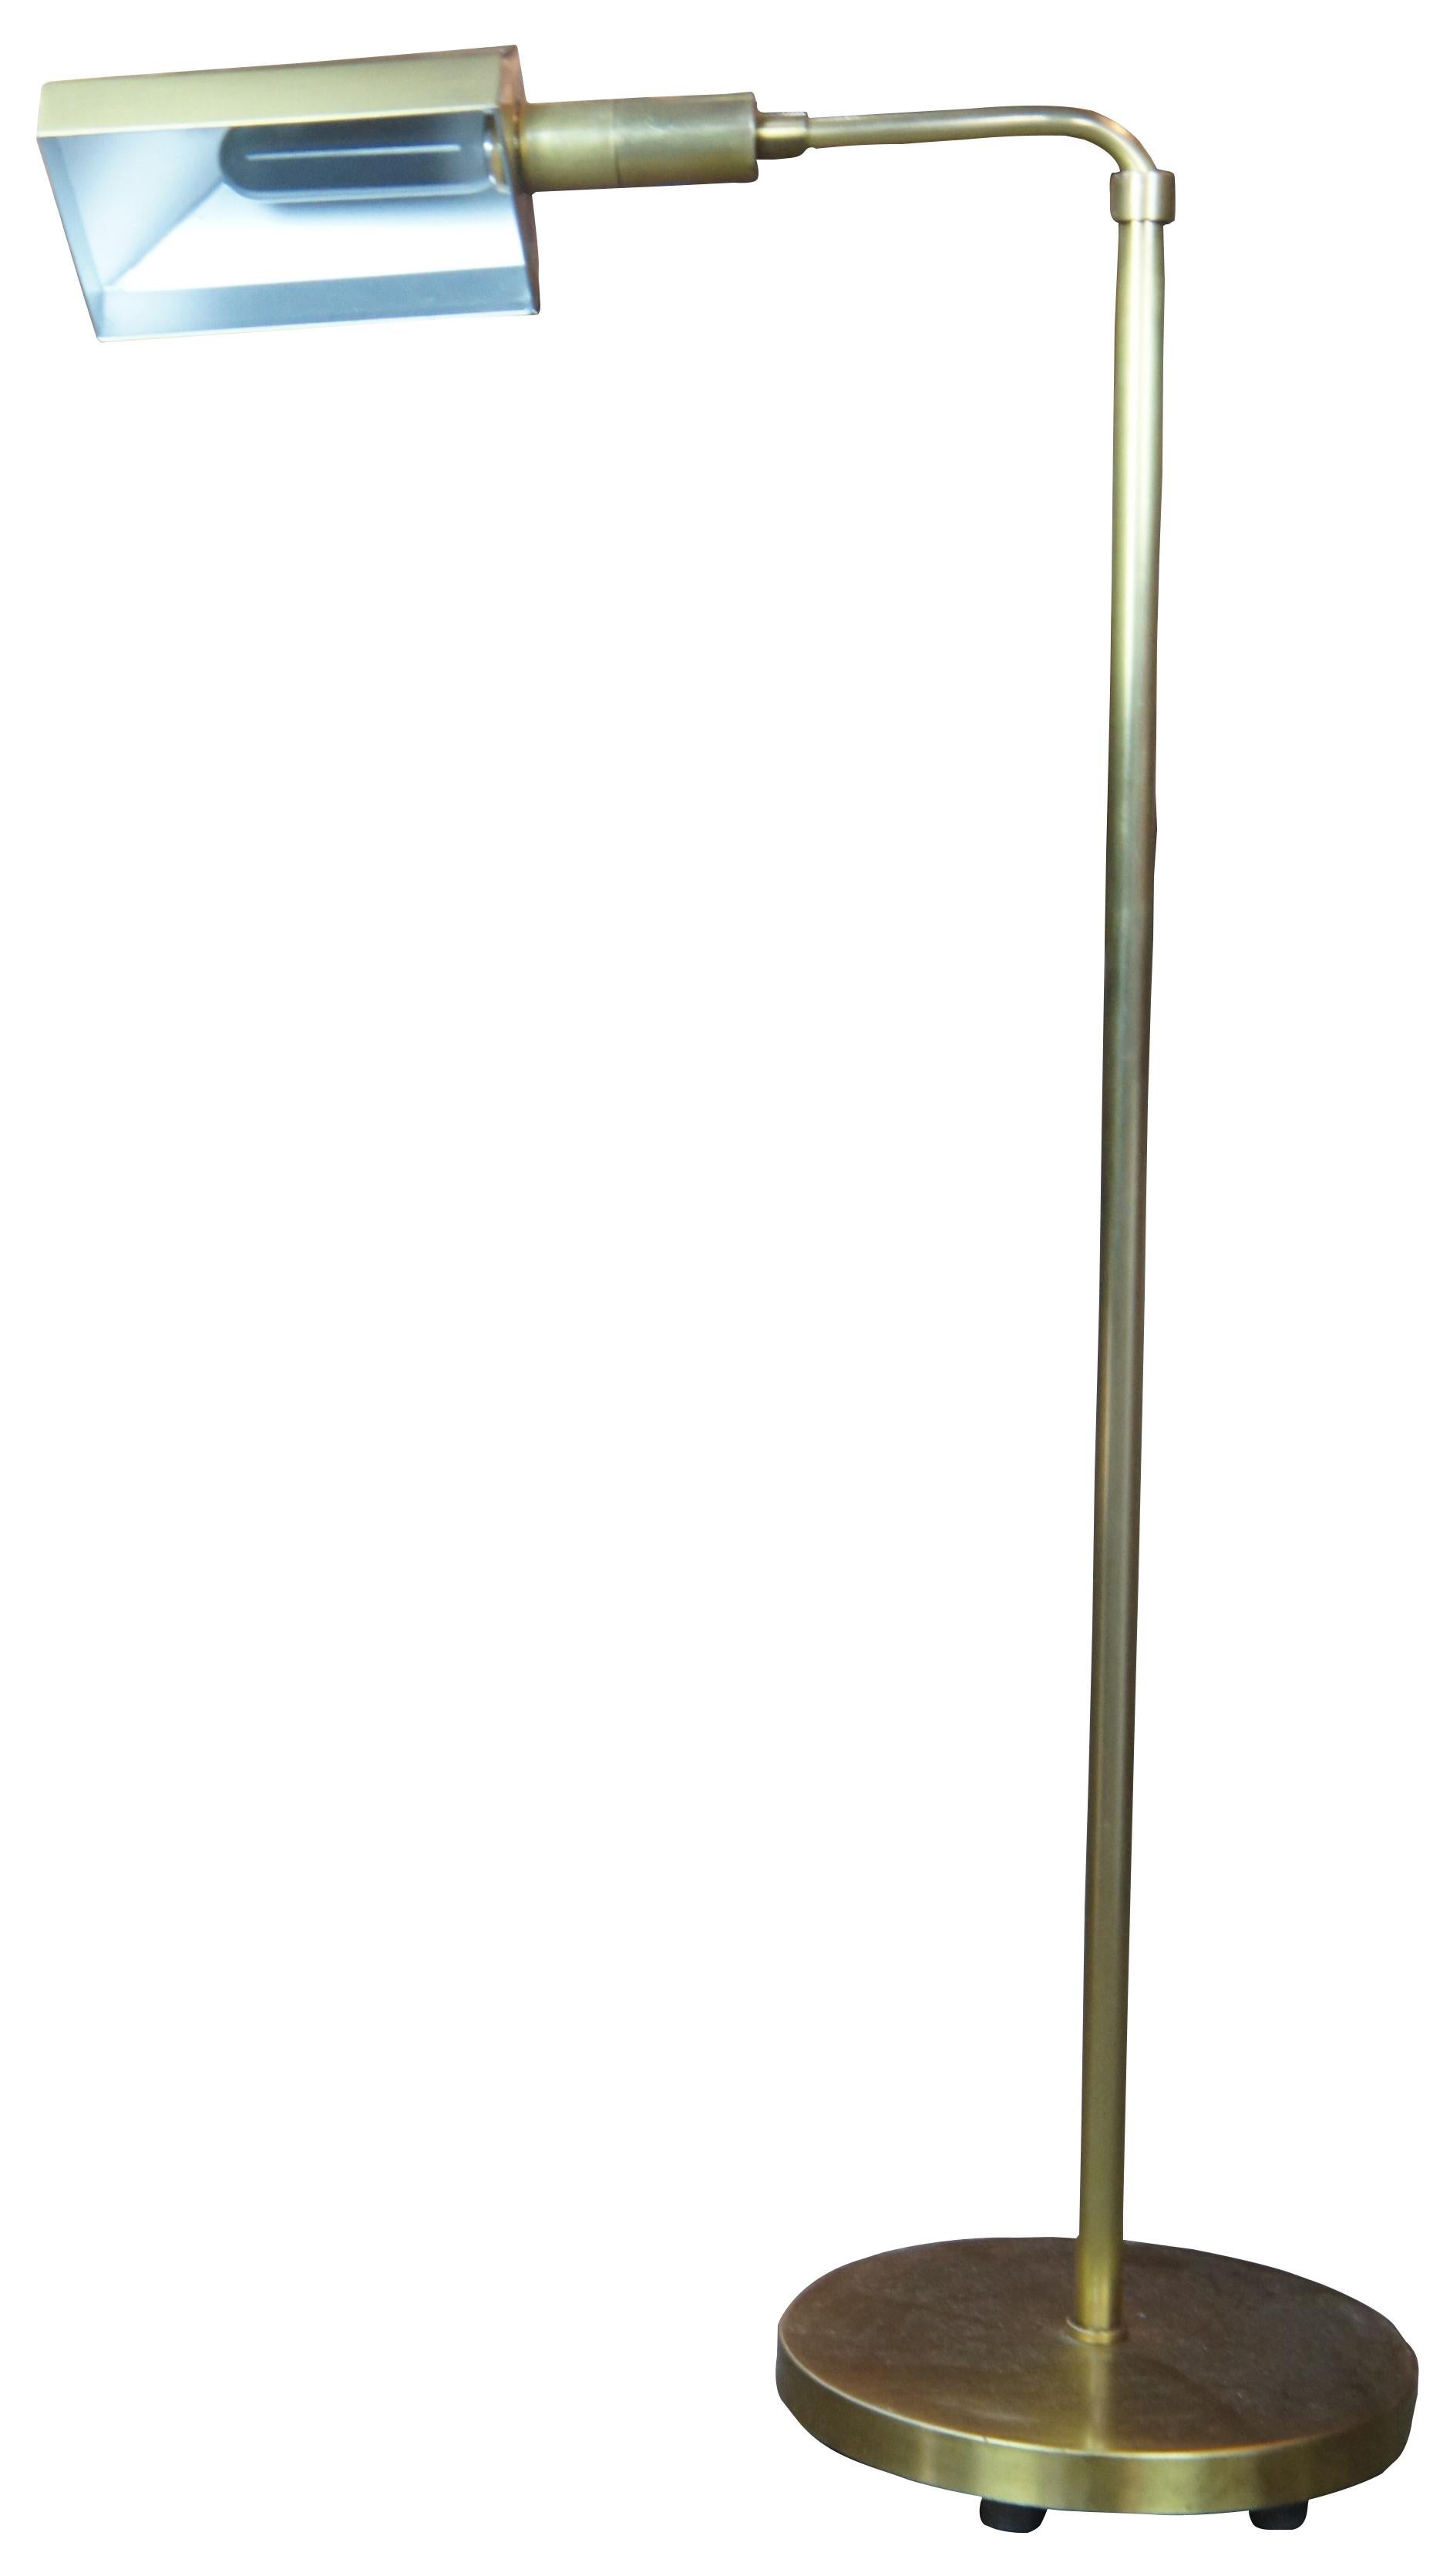 1980 Chapman Mfg Co adjustable floor lamp. Made of brass featuring round base with triangular geometric form shade. Measures: 38